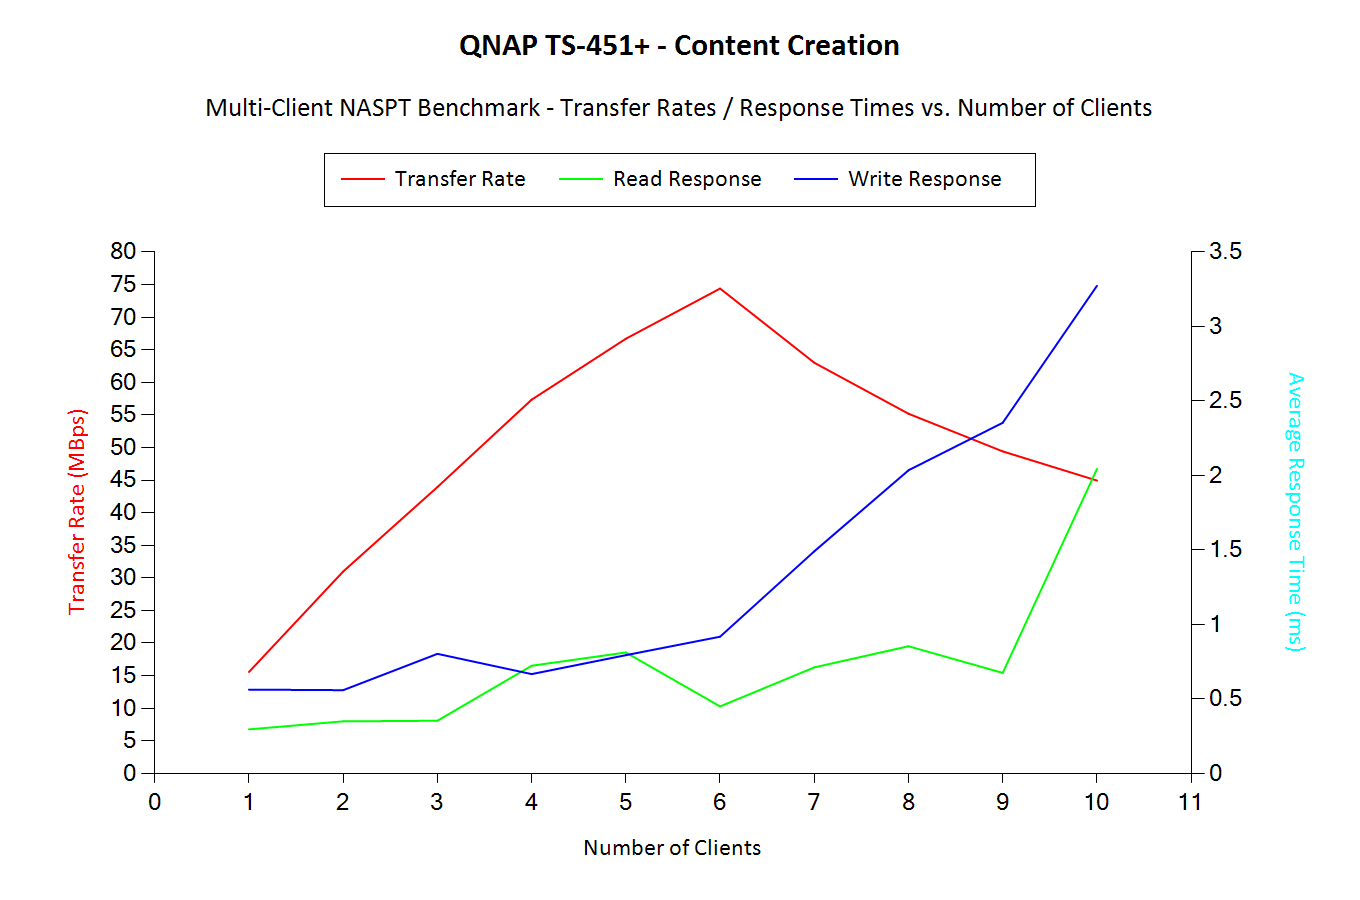 Content Creation - Multi-Client Benchmark